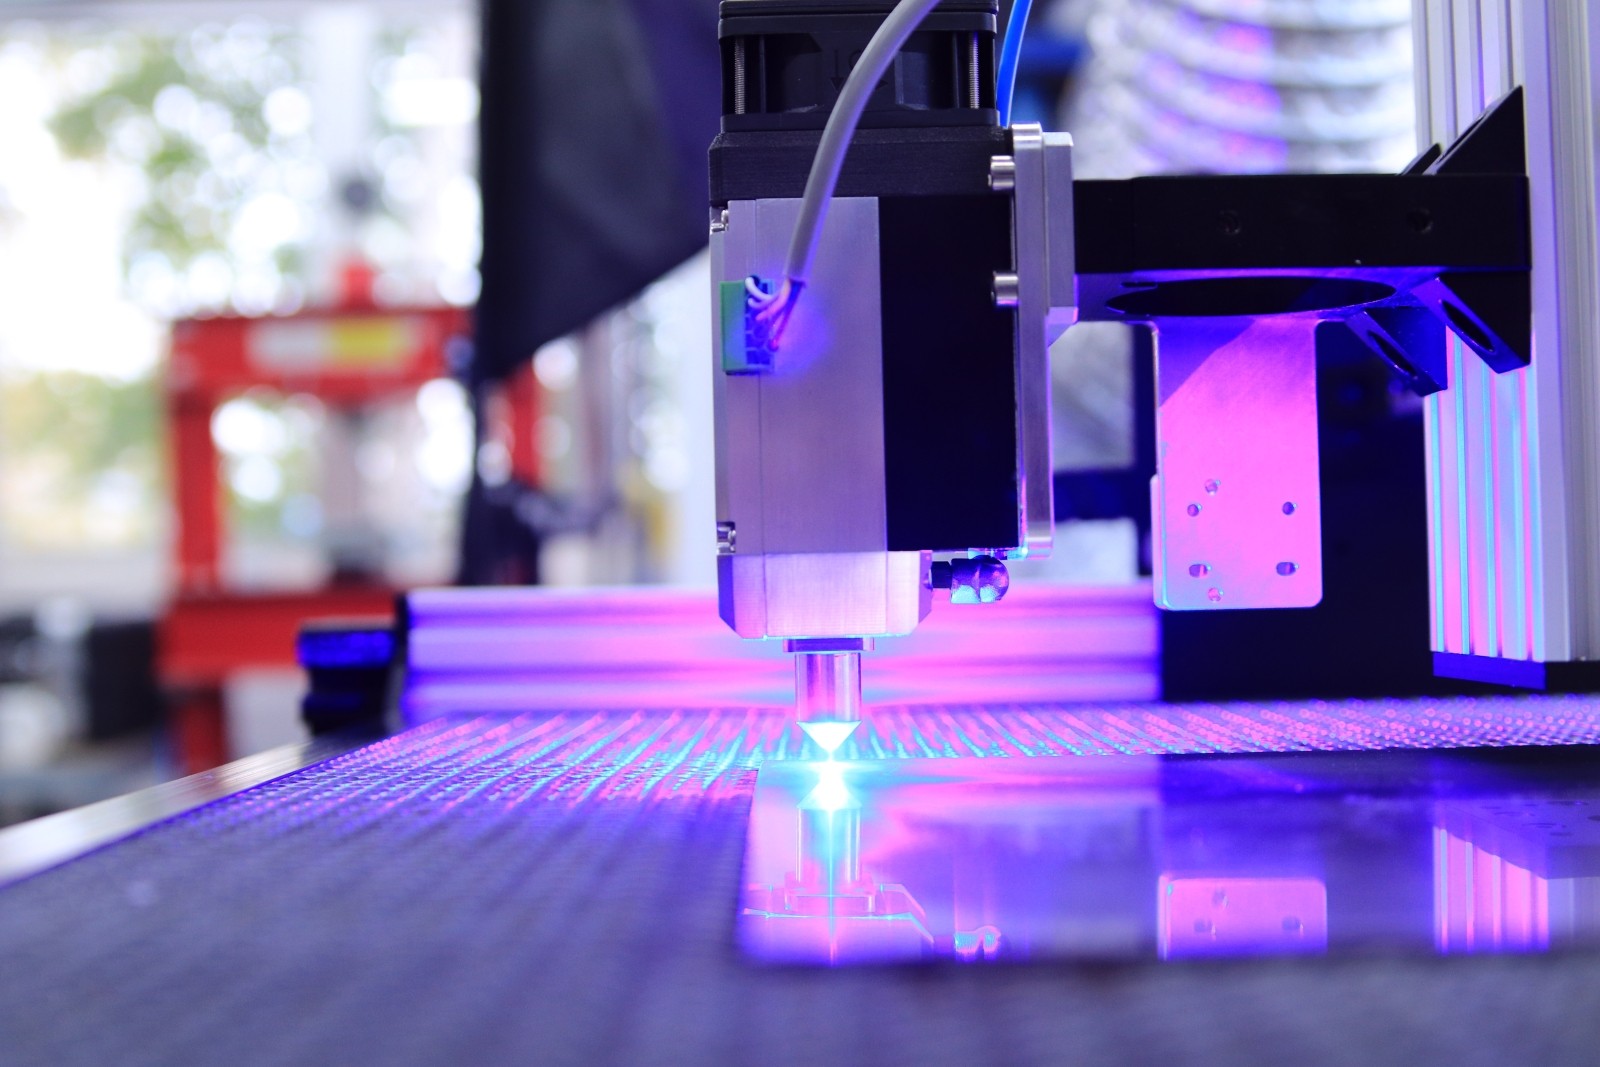 Solarglide invest in 3D printing